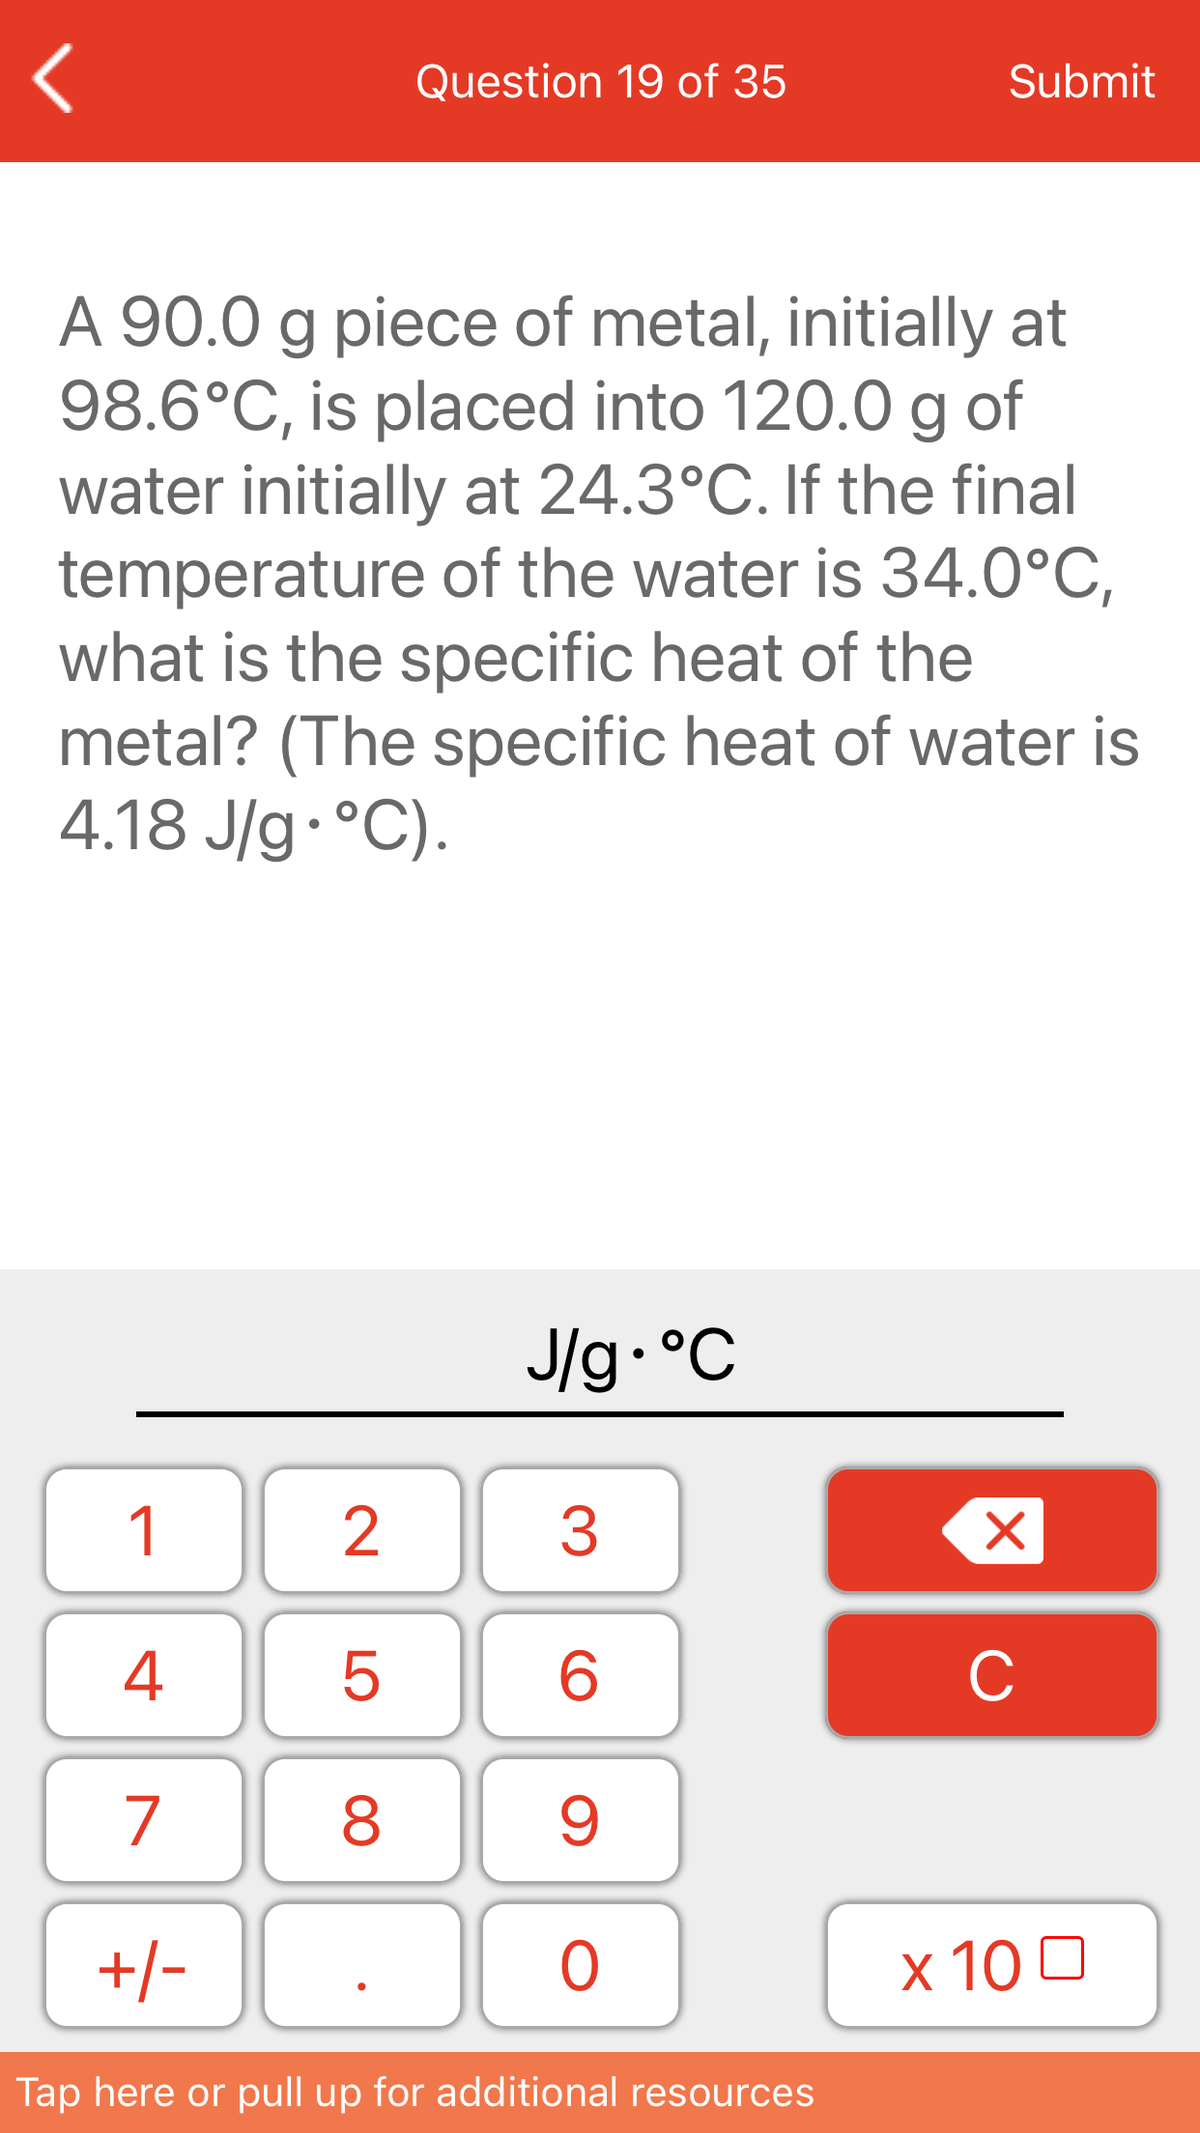 Question 19 of 35
Submit
A 90.0 g piece of metal, initially at
98.6°C, is placed into 120.0 g of
water initially at 24.3°C. If the final
temperature of the water is 34.0°C,
what is the specific heat of the
metal? (The specific heat of water is
4.18 J/g•°C).
J/g•°C
1
4
C
7
+/-
x 10 0
Tap here or pull up for additional resources
LO
00
